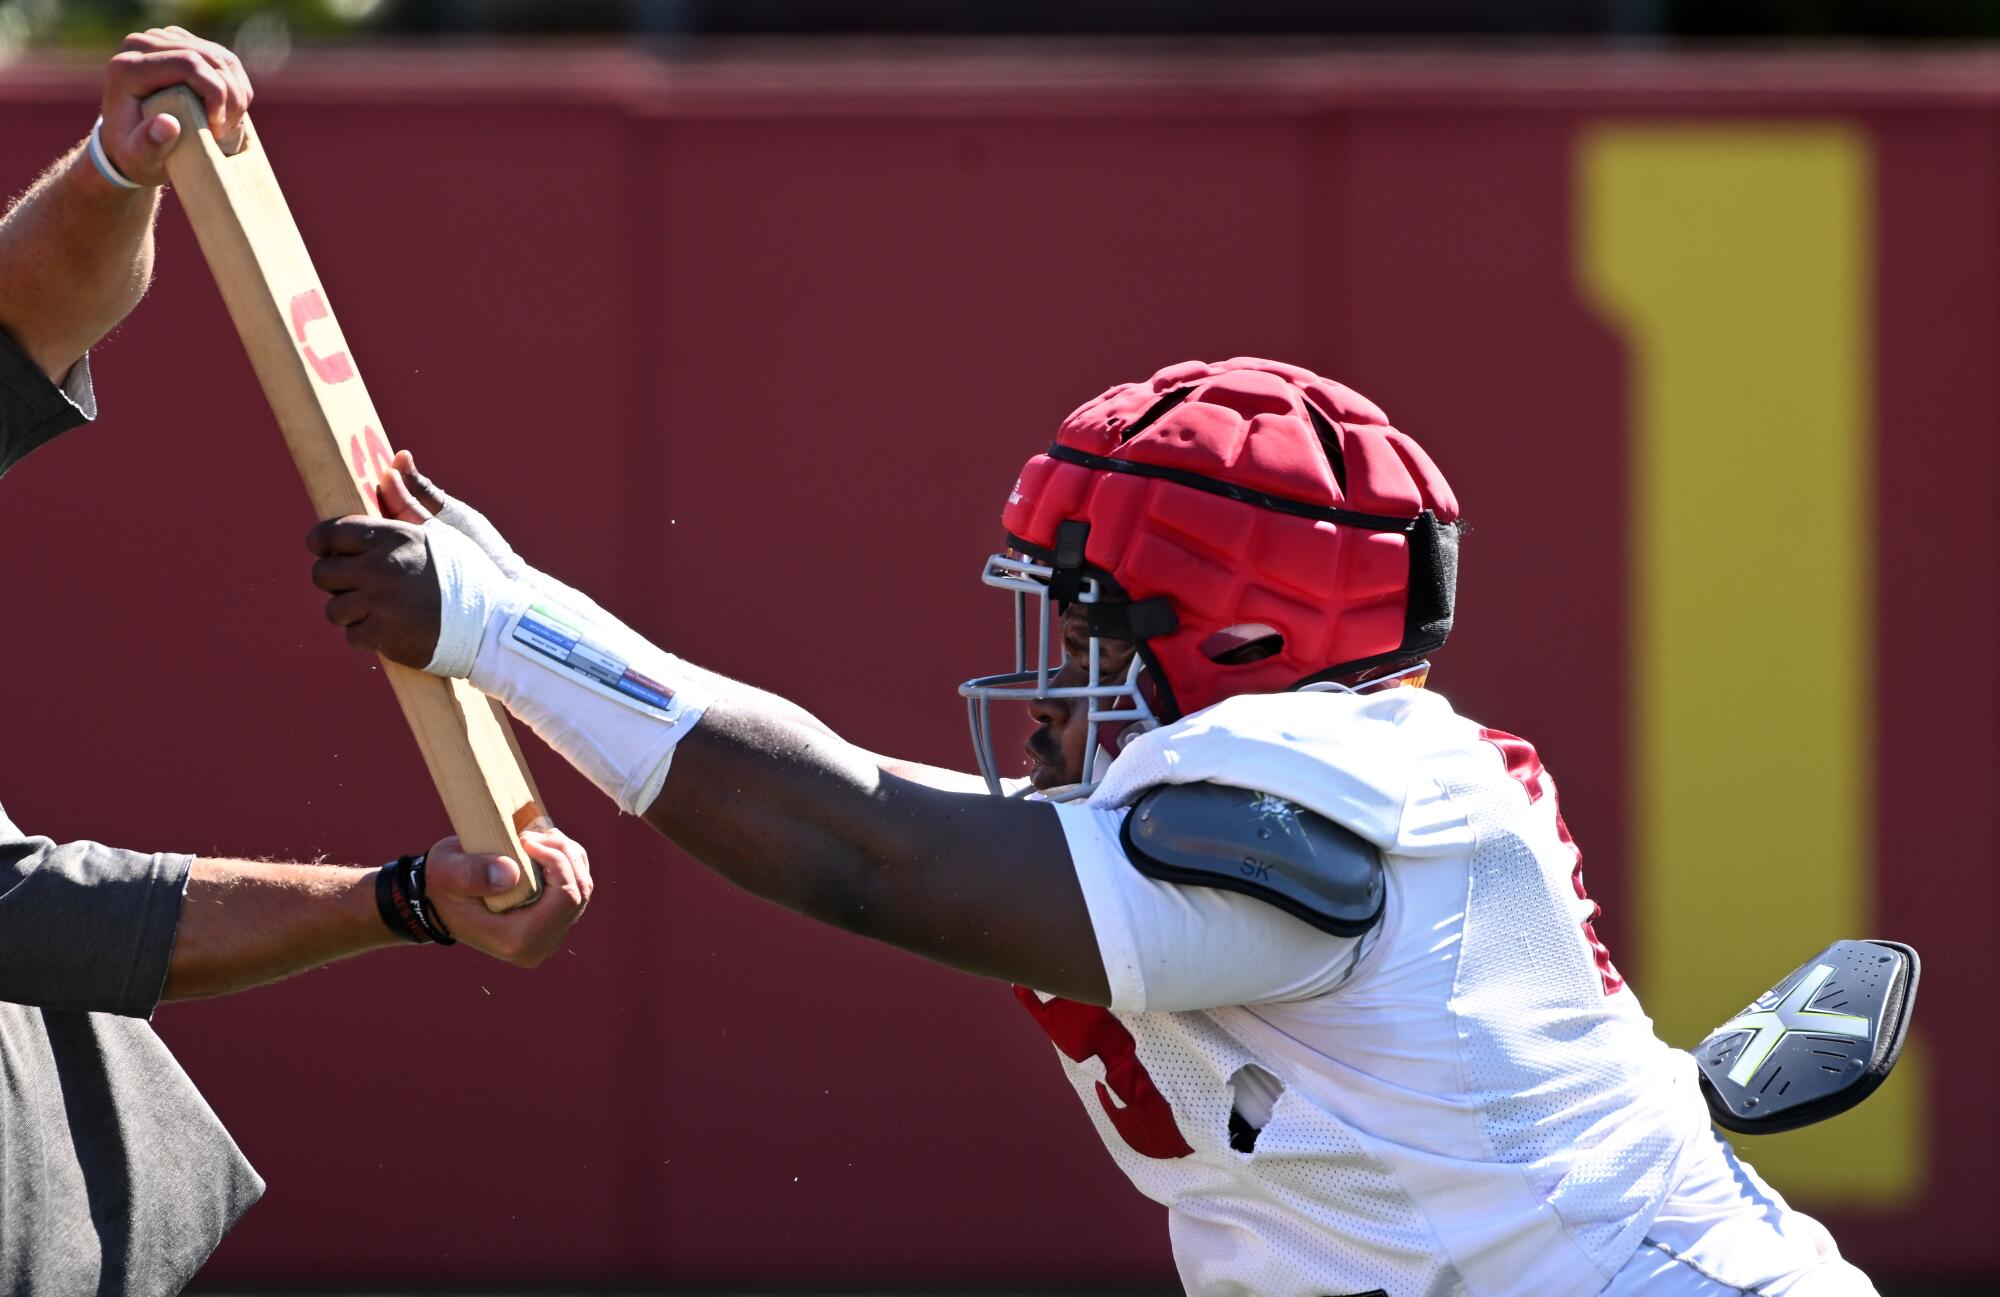 USC defensive lineman Bear Alexander pushes a board during football practice